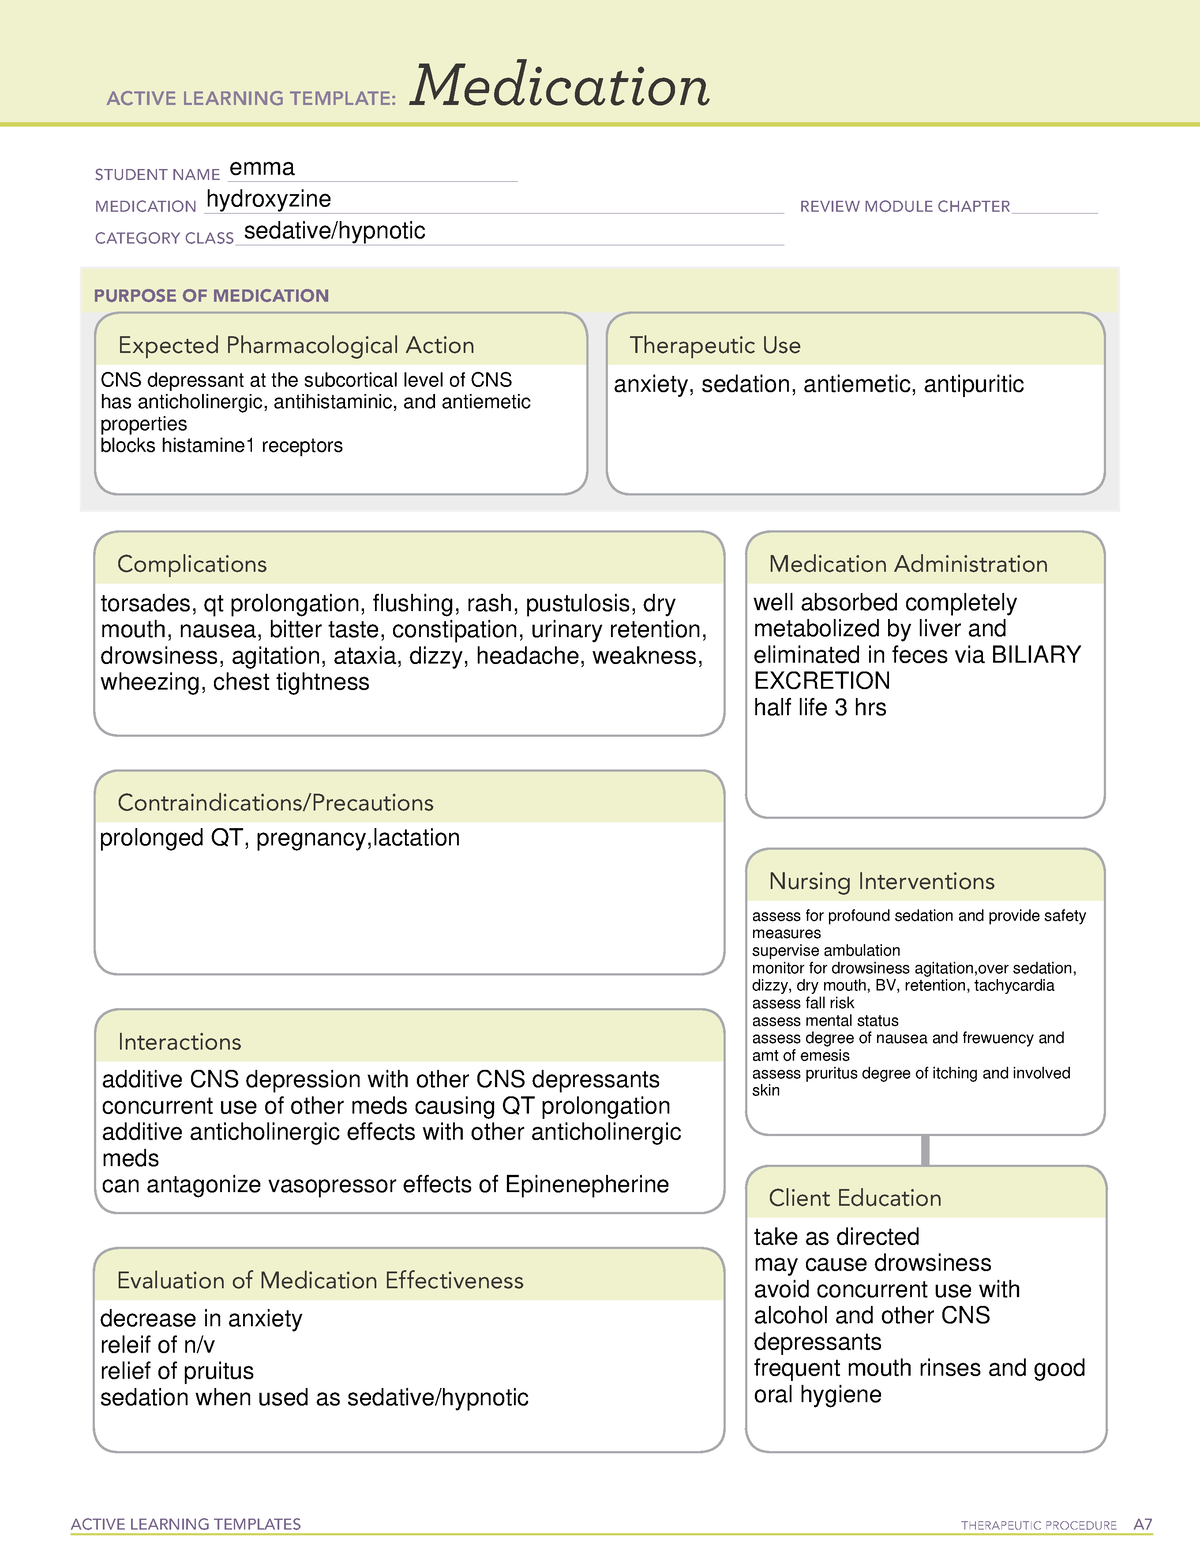 Hydroxyzine med cards ACTIVE LEARNING TEMPLATES THERAPEUTIC